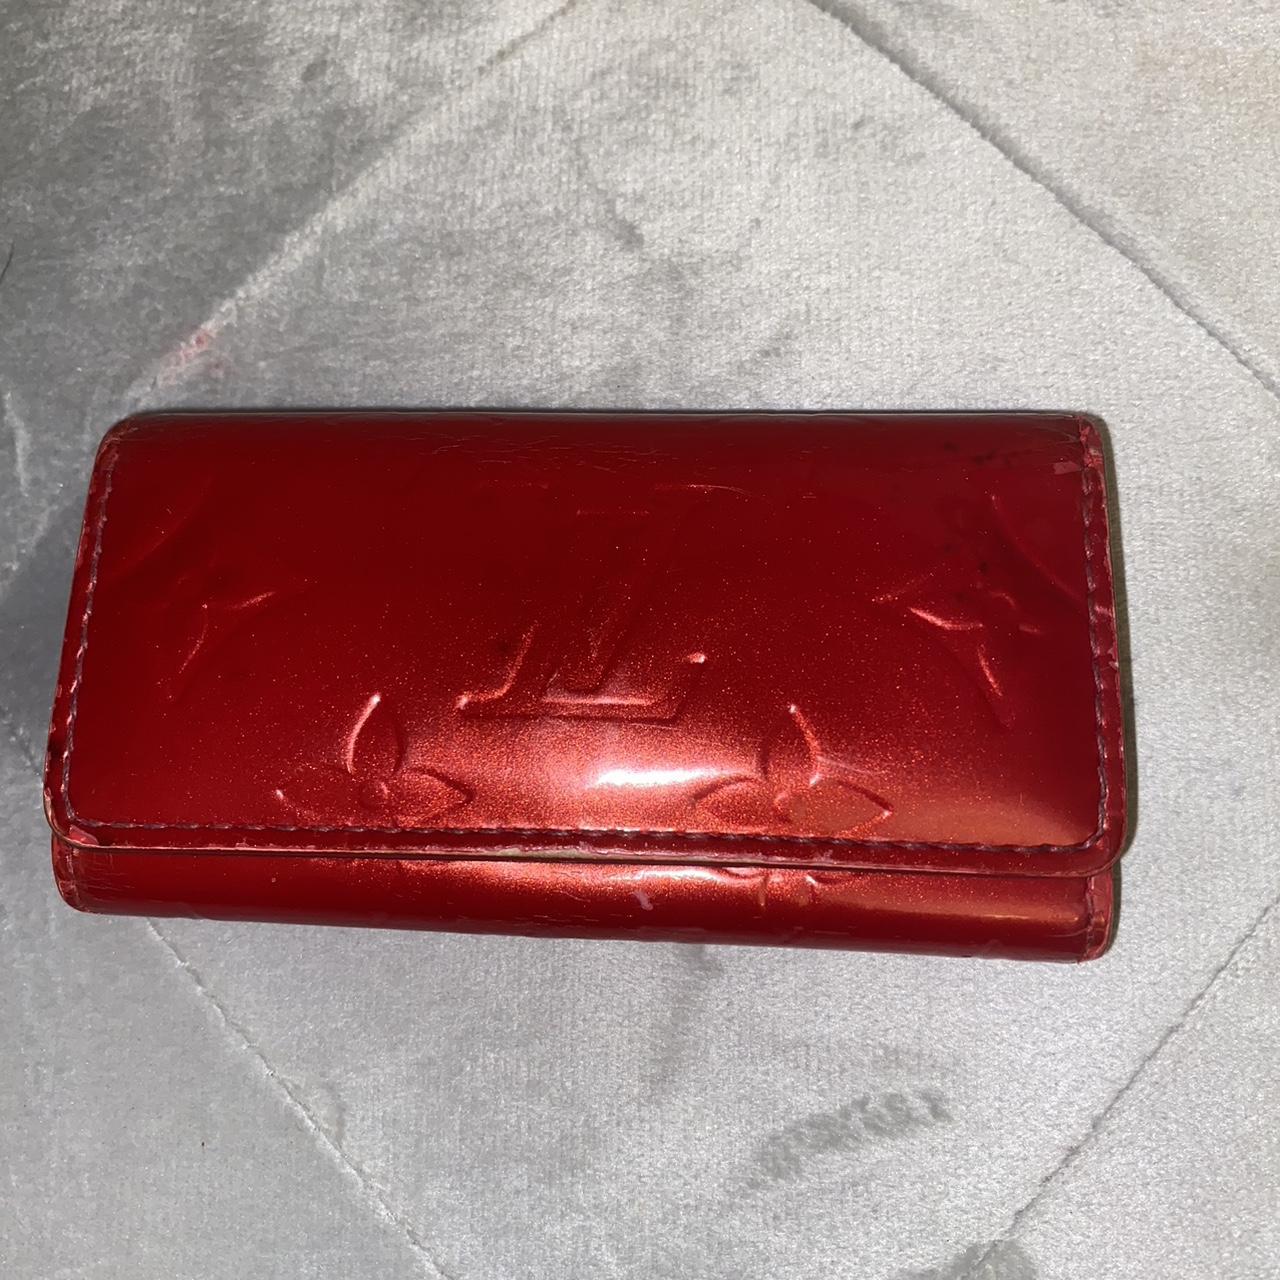 Louis Vuitton Vernis Key Pouch - Red Wallets, Accessories